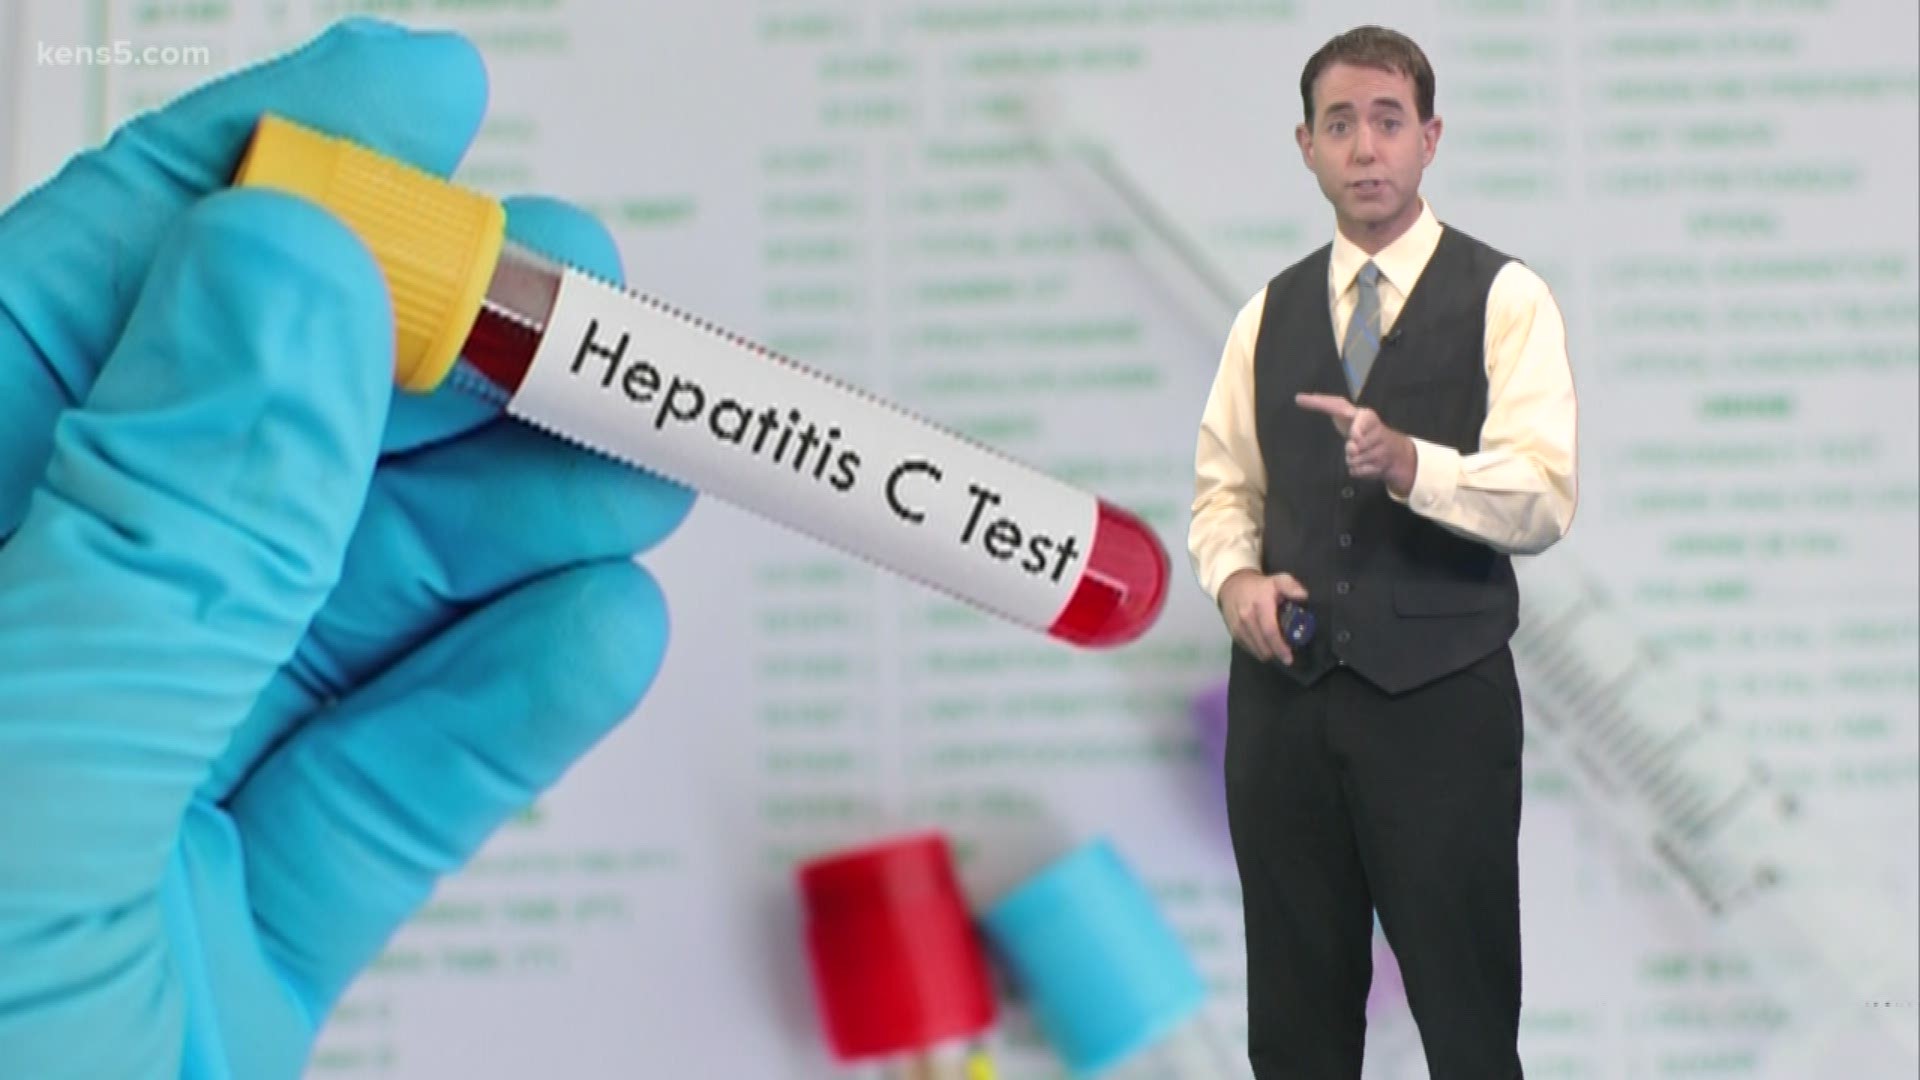 If left untreated, Hepatitis C can be deadly.